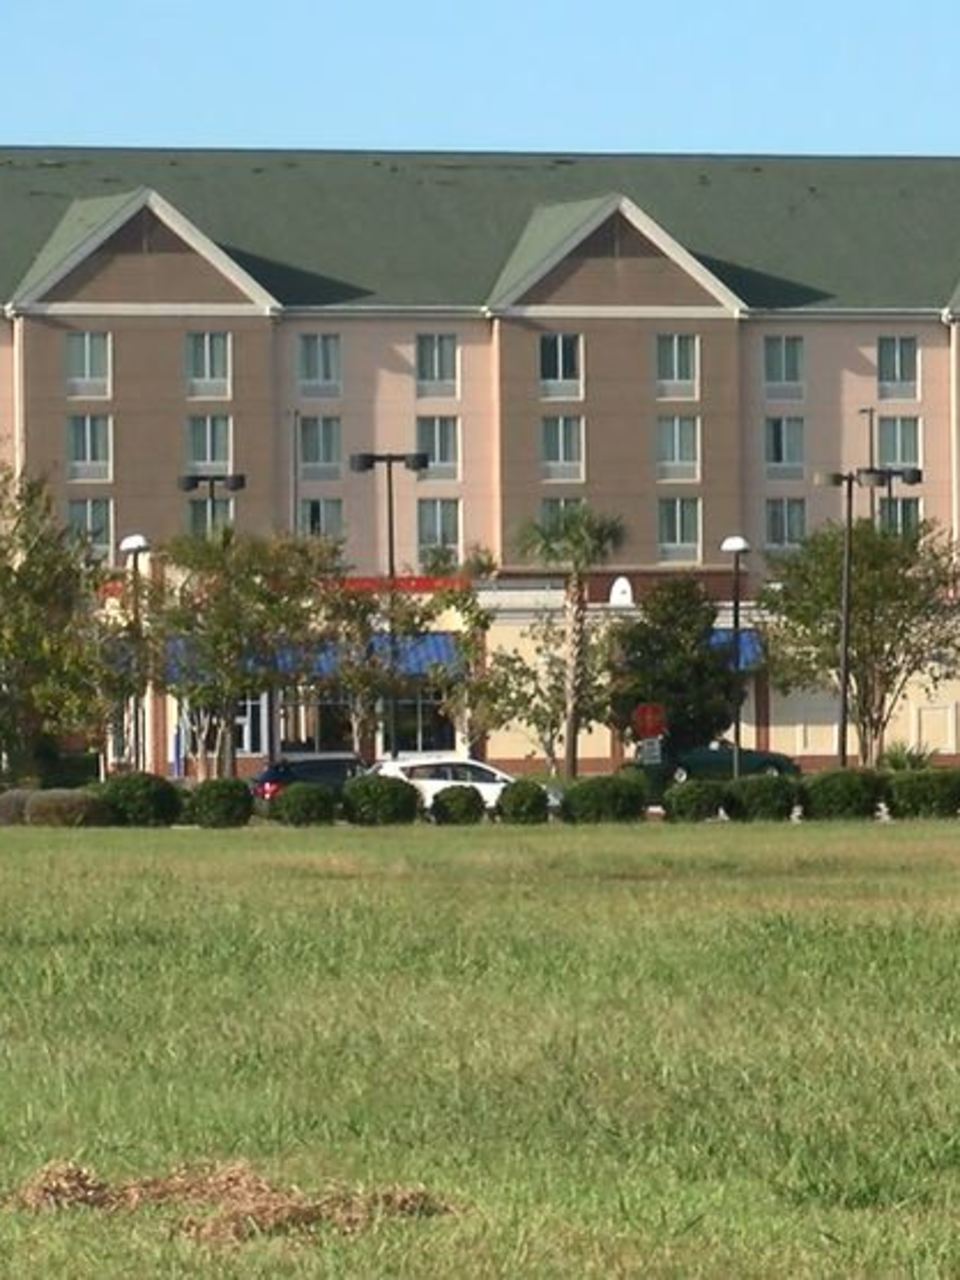 Fbi Agent Officers Specifically Chose Local Hotel To Host